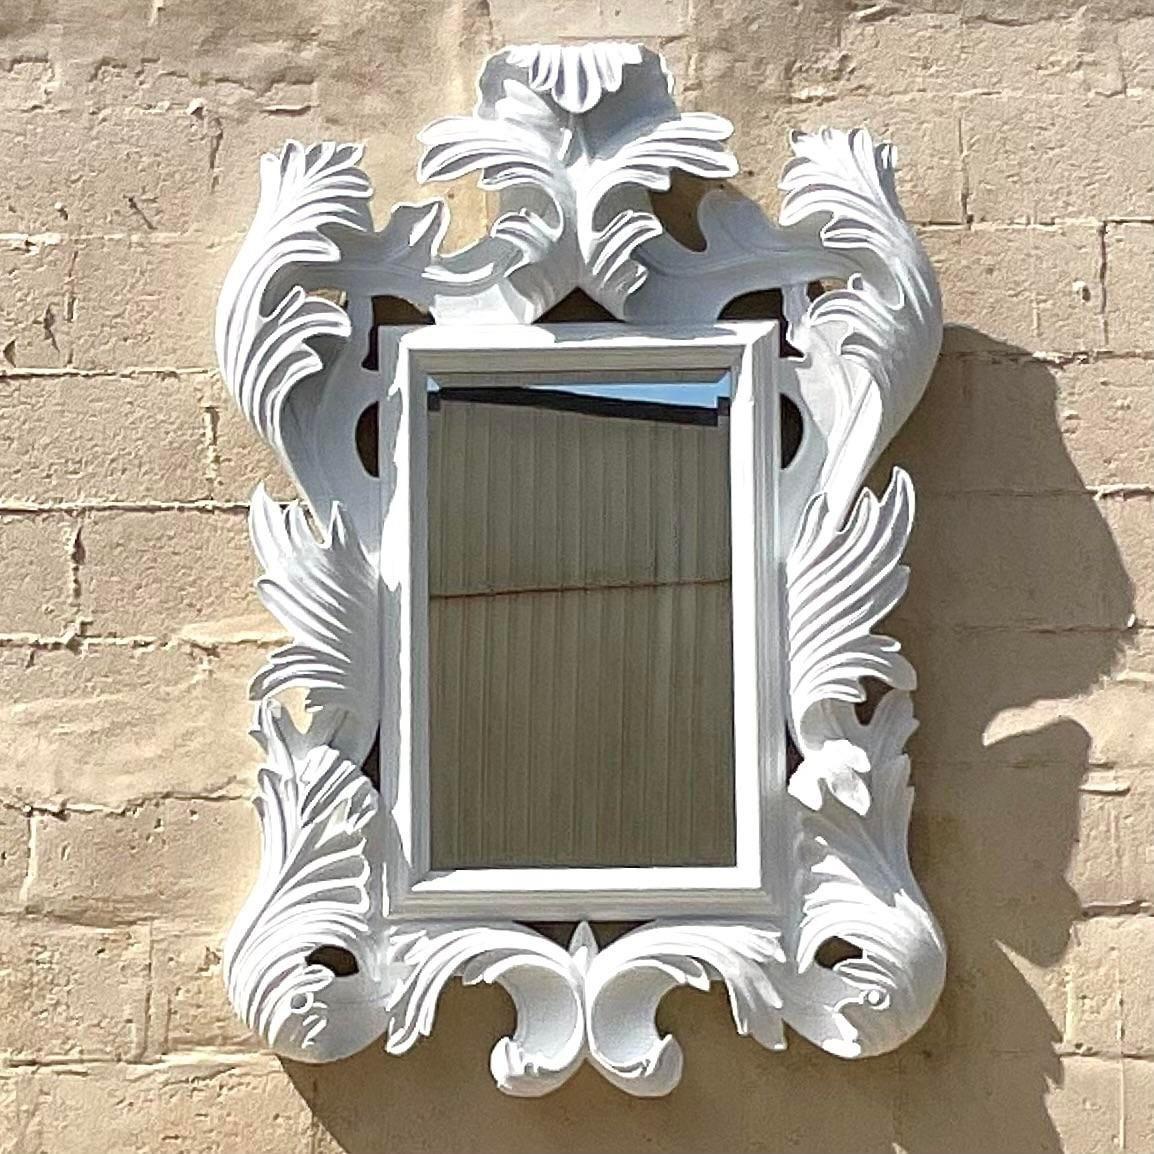 A stunning vintage Regency wall mirror. Made by the iconic Marge Carson group. A wild and dramatic Rococo style with an amazing flourish design. Finished in a matted plaster white. Acquired from a Palm Beach estate.